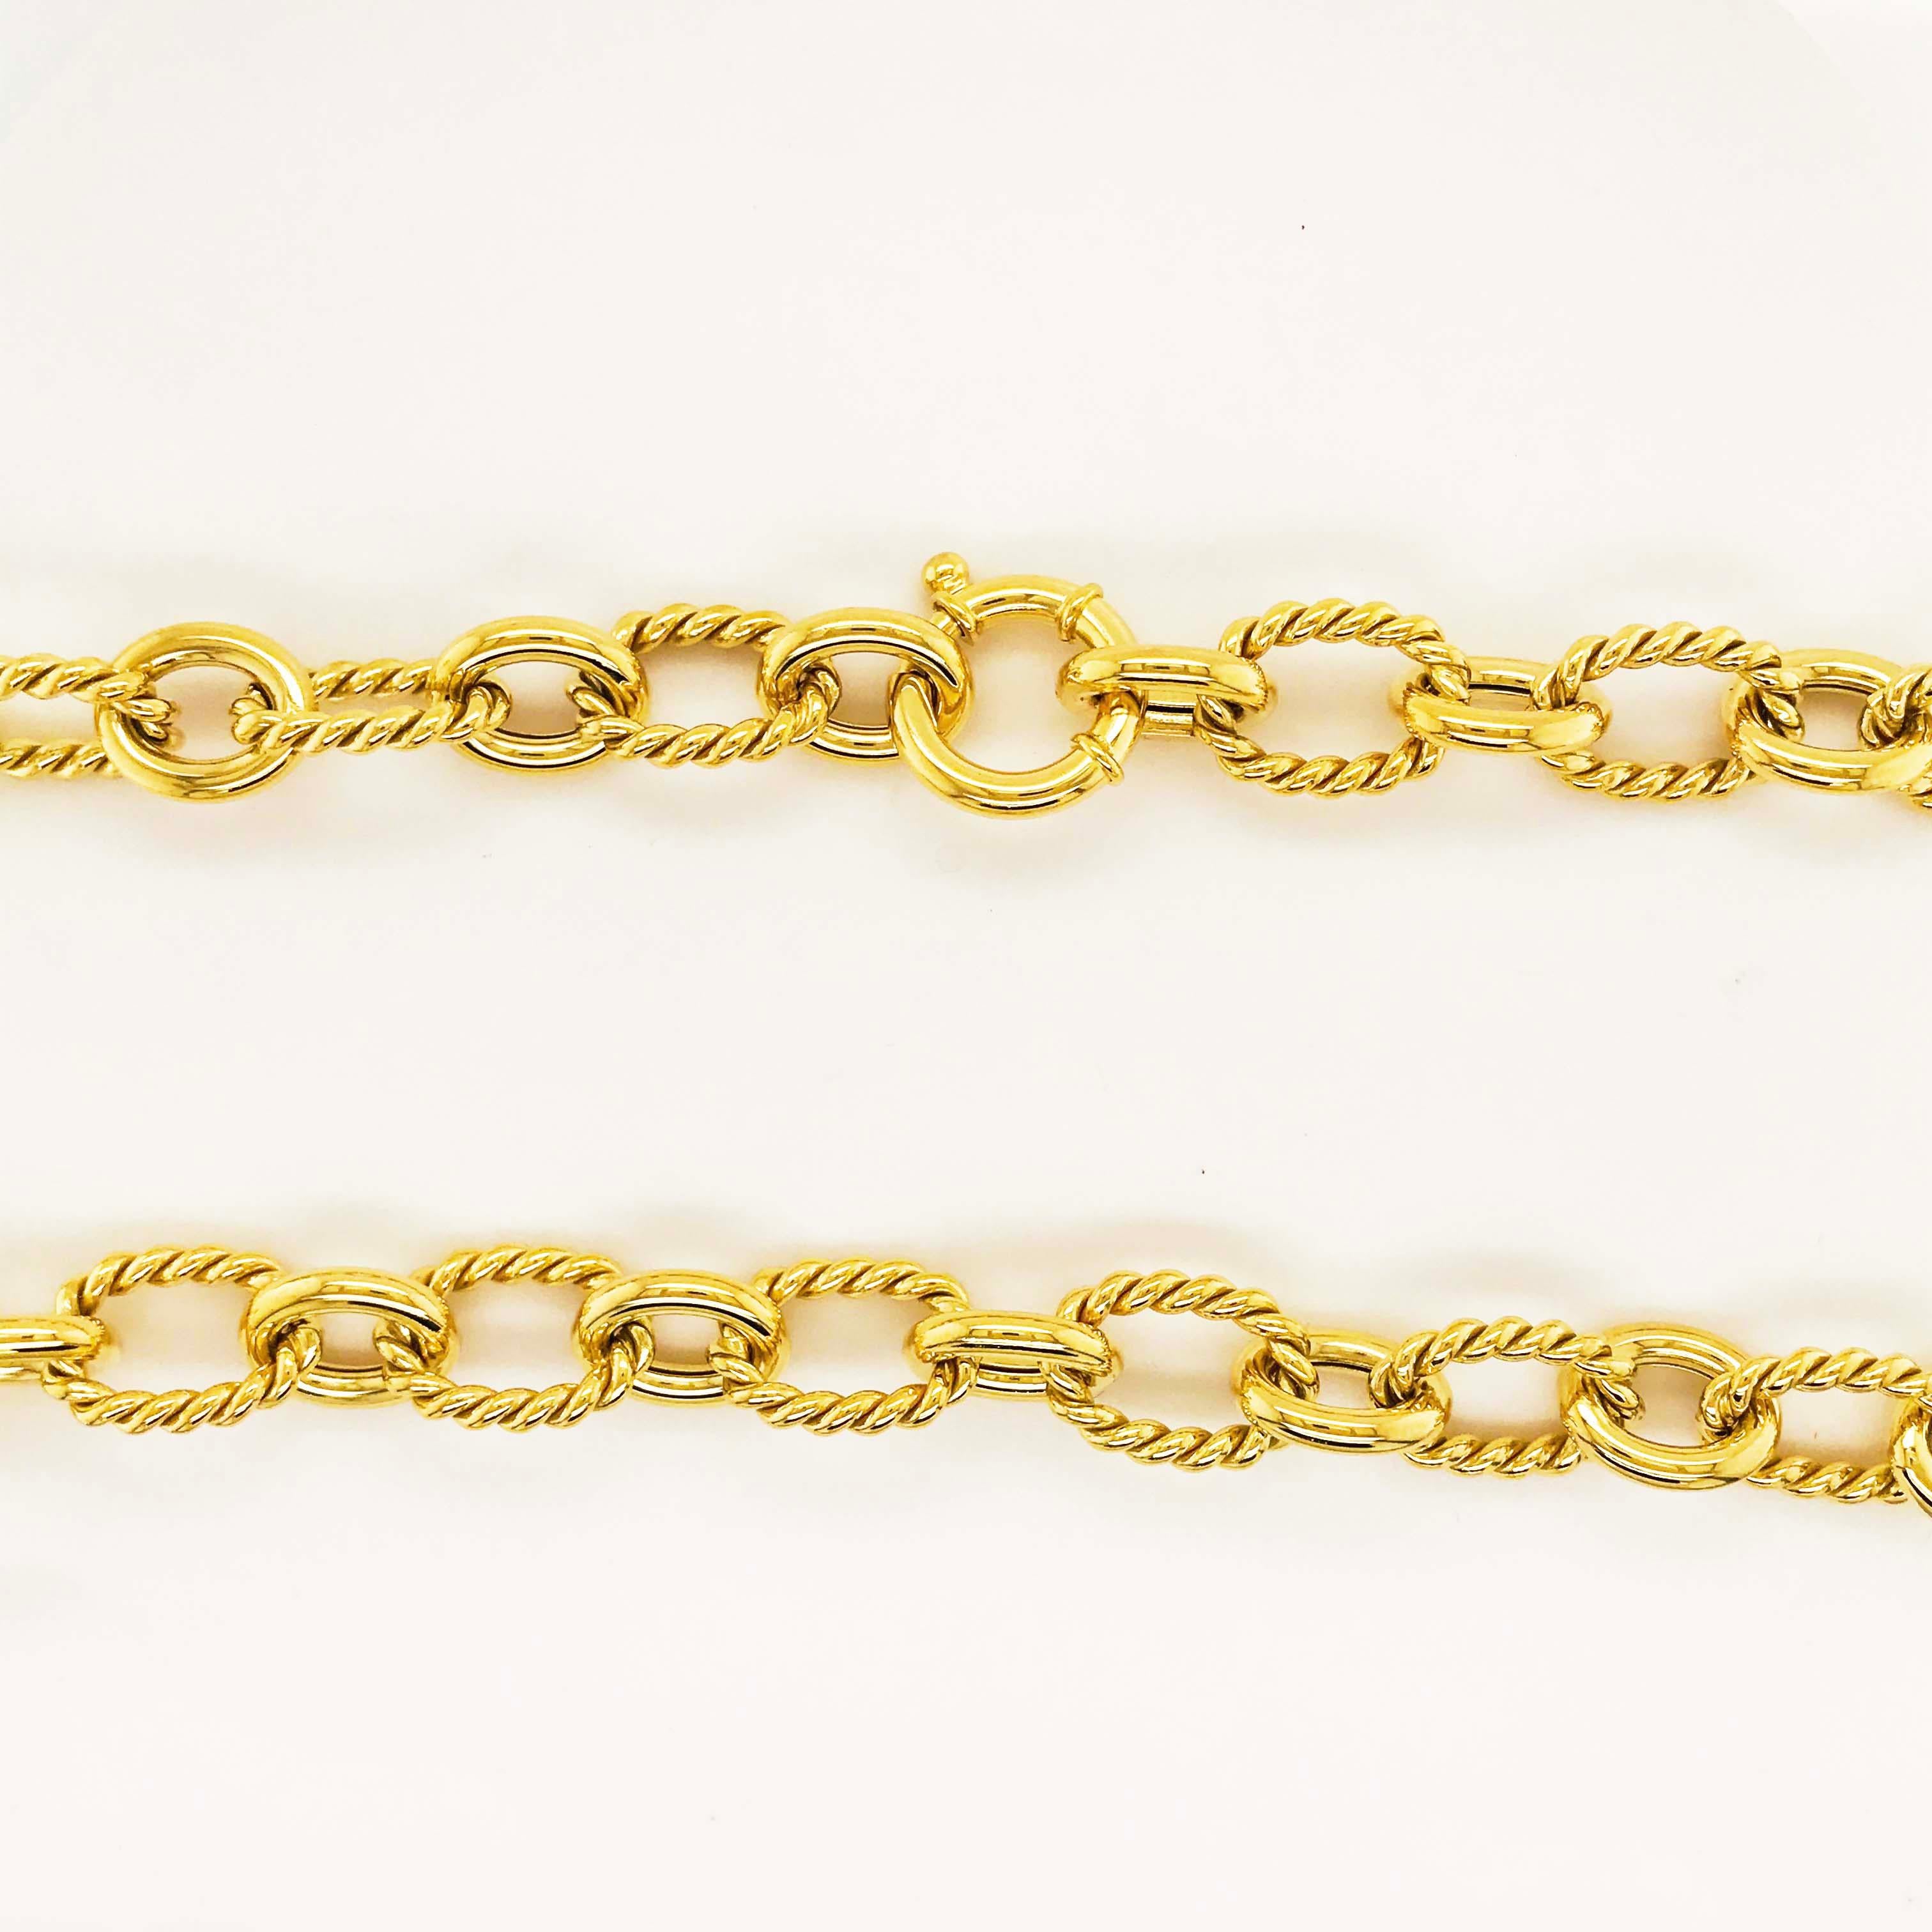 Large Link Chain Necklace 14 Karat Gold and Polished Oval Links-Chain ...